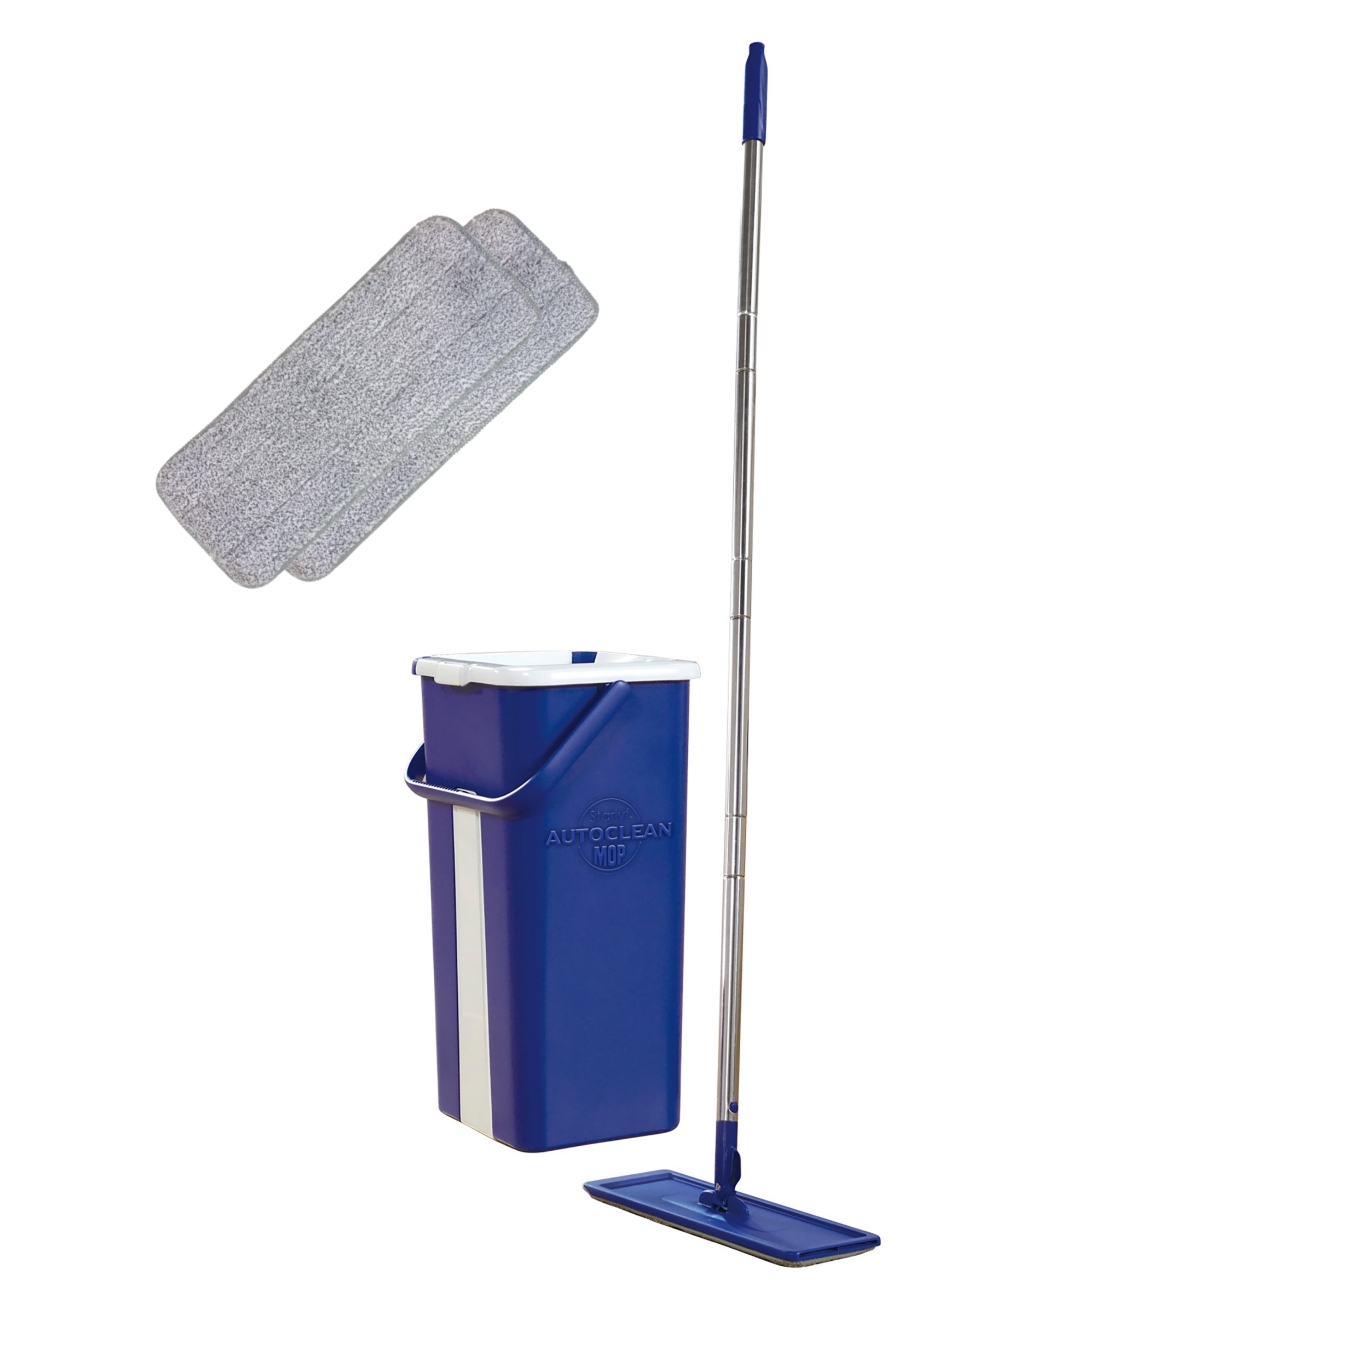 View Starlyf AutoClean Mop Deluxe 27L Self Cleaning Self Drying Mop Bucket 360 Pivoting Head High Street TV information